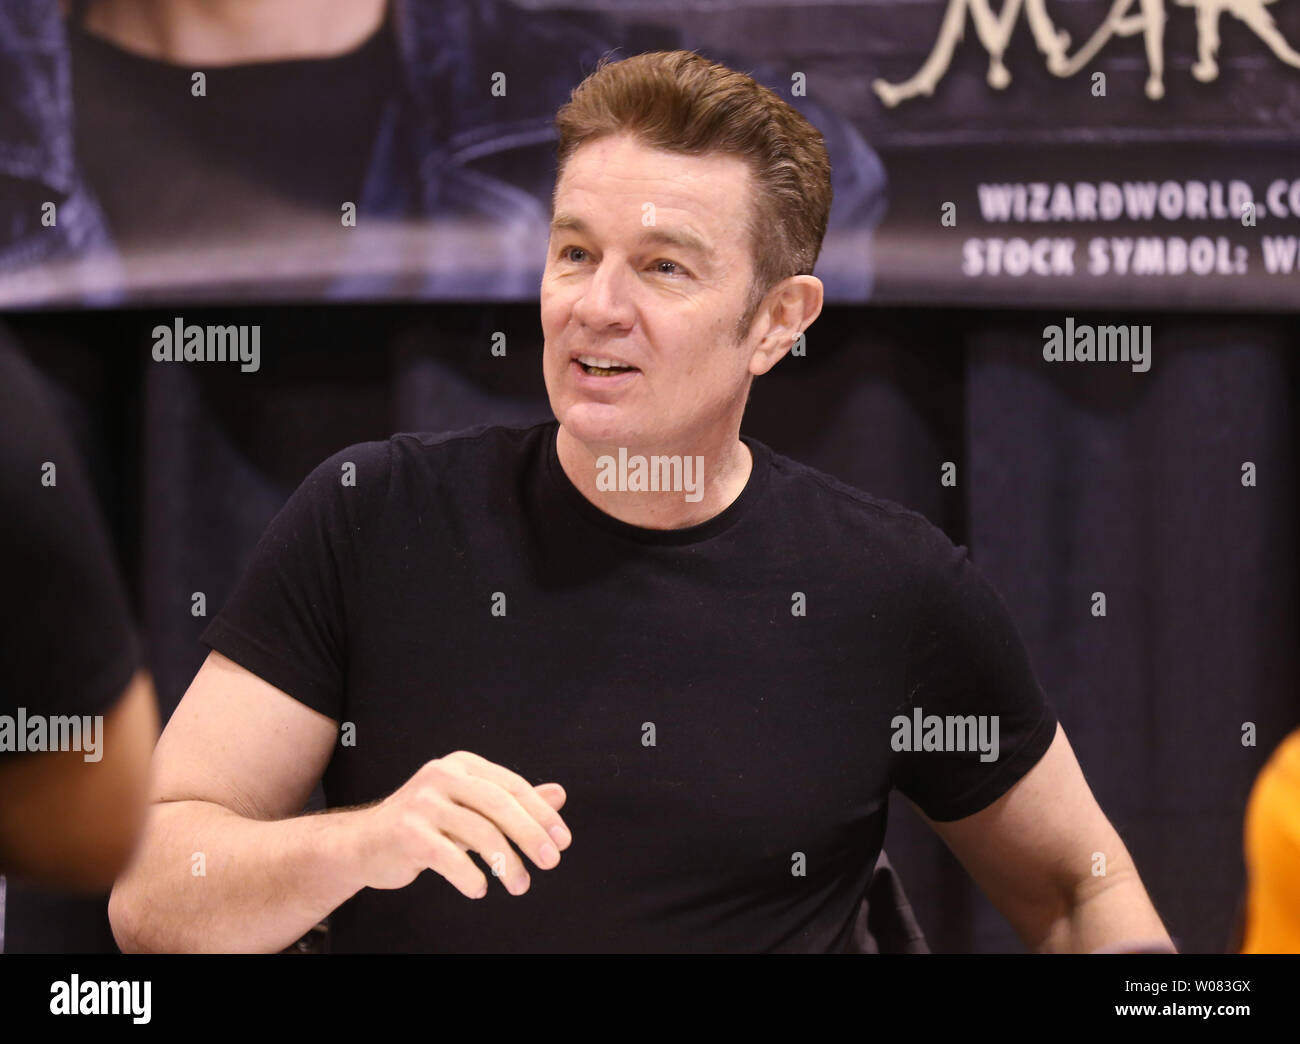 Actor James Marsters talks to fans on Day one of the Wizardworld Comic Con at America's Center at the Dome in St. Louis on February 2, 2018. Marsters first came to the attention of the general public playing the popular character Spike, a platinum-blond English vampire in the television series Buffy the Vampire Slayer and its spin-off series, Angel, from 1997 to 2004. The three day event presents the latest in pop culture, comics and si-fi movie memorabilia.    Photo by Bill Greenblatt/UPI Stock Photo